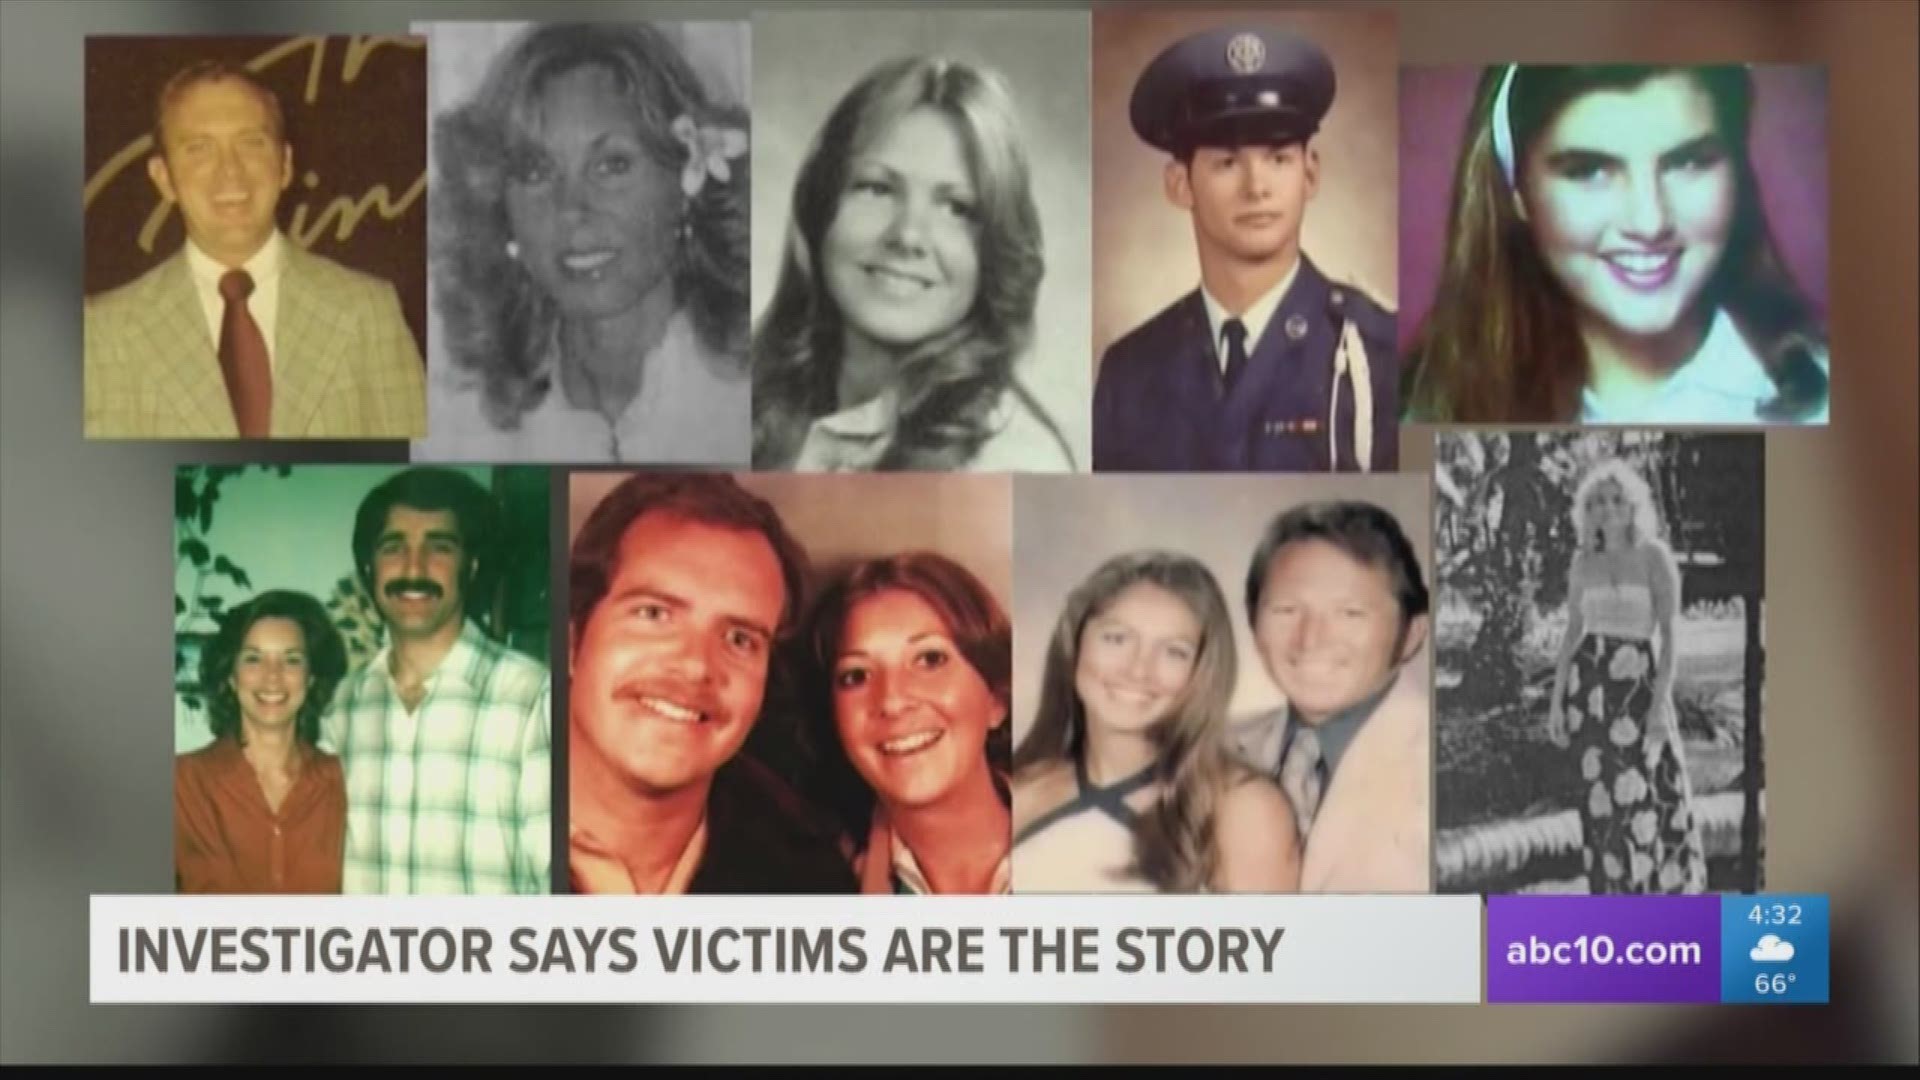 One of the lead investigators in the East Area Rapist case during the 1970s has kept in touch with several of the victims during the last four decades. 